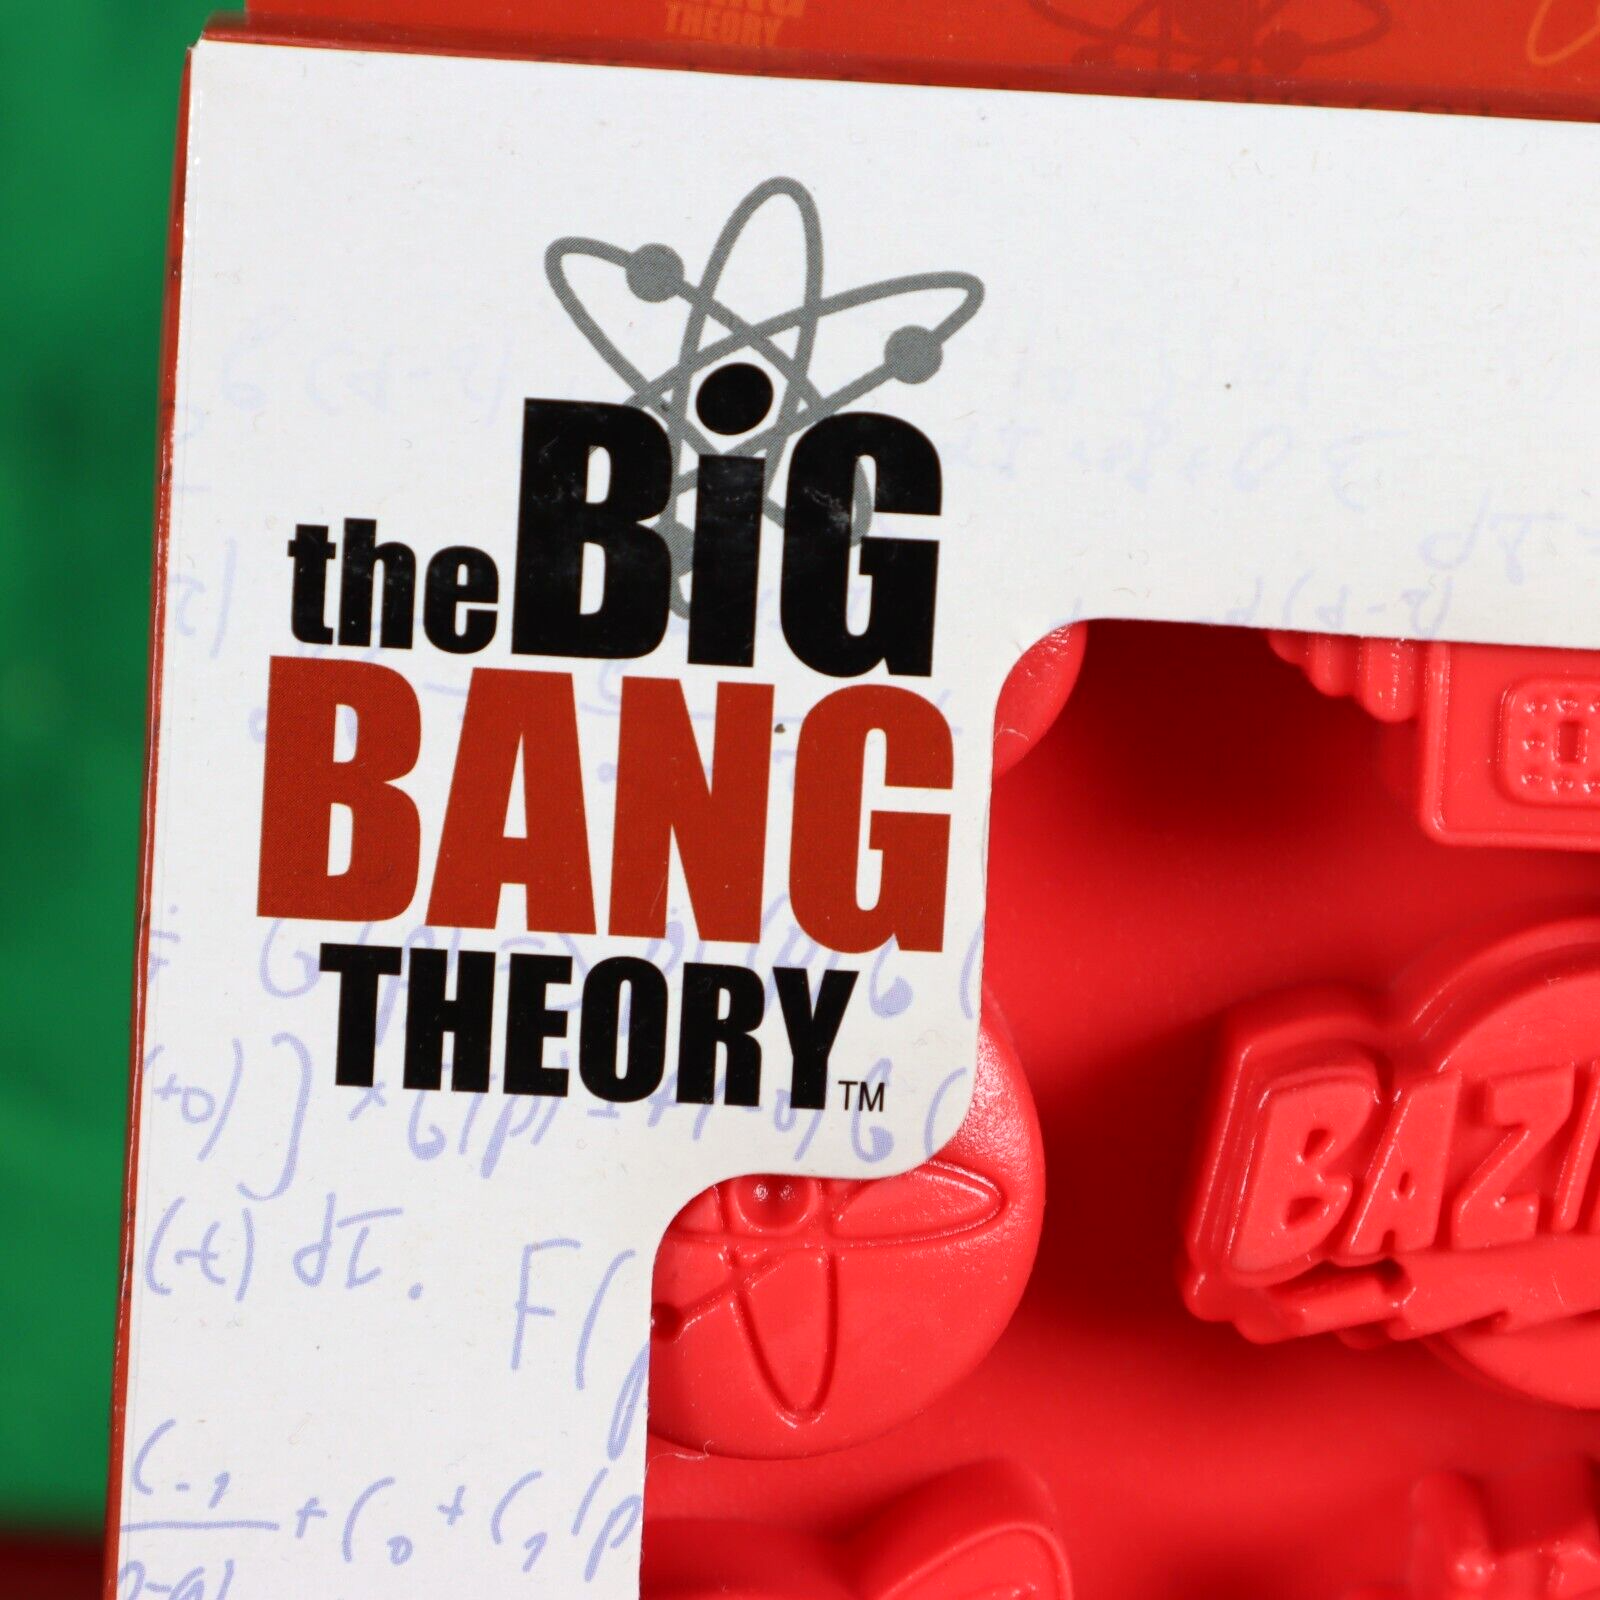 The Big Bang Theory Silicone Ice Cube Tray Collector's Series iCup Bazinga Robot icup 09473 - фотография #5